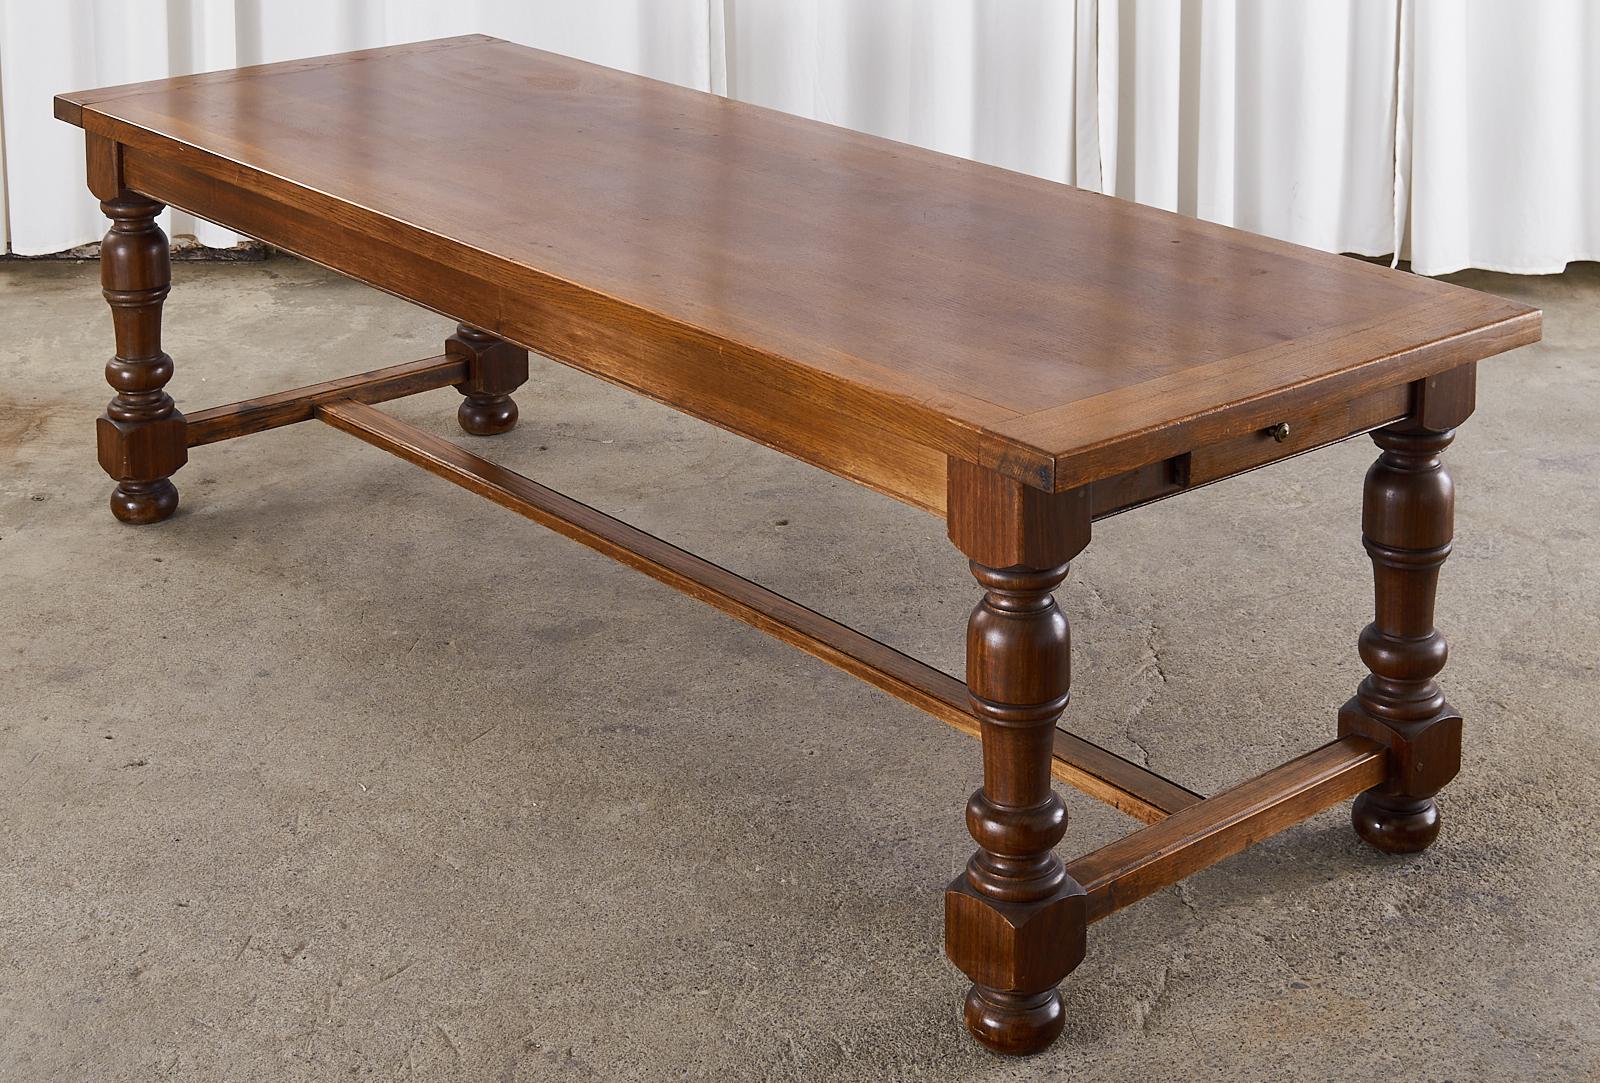 Large country English provincial farmhouse dining table hand-crafted from oak. The top features oak planks nearly 2 inches thick with breadboard ends and showcases the rich oak woodgrain patterns. The trestle style base has a small storage drawer on